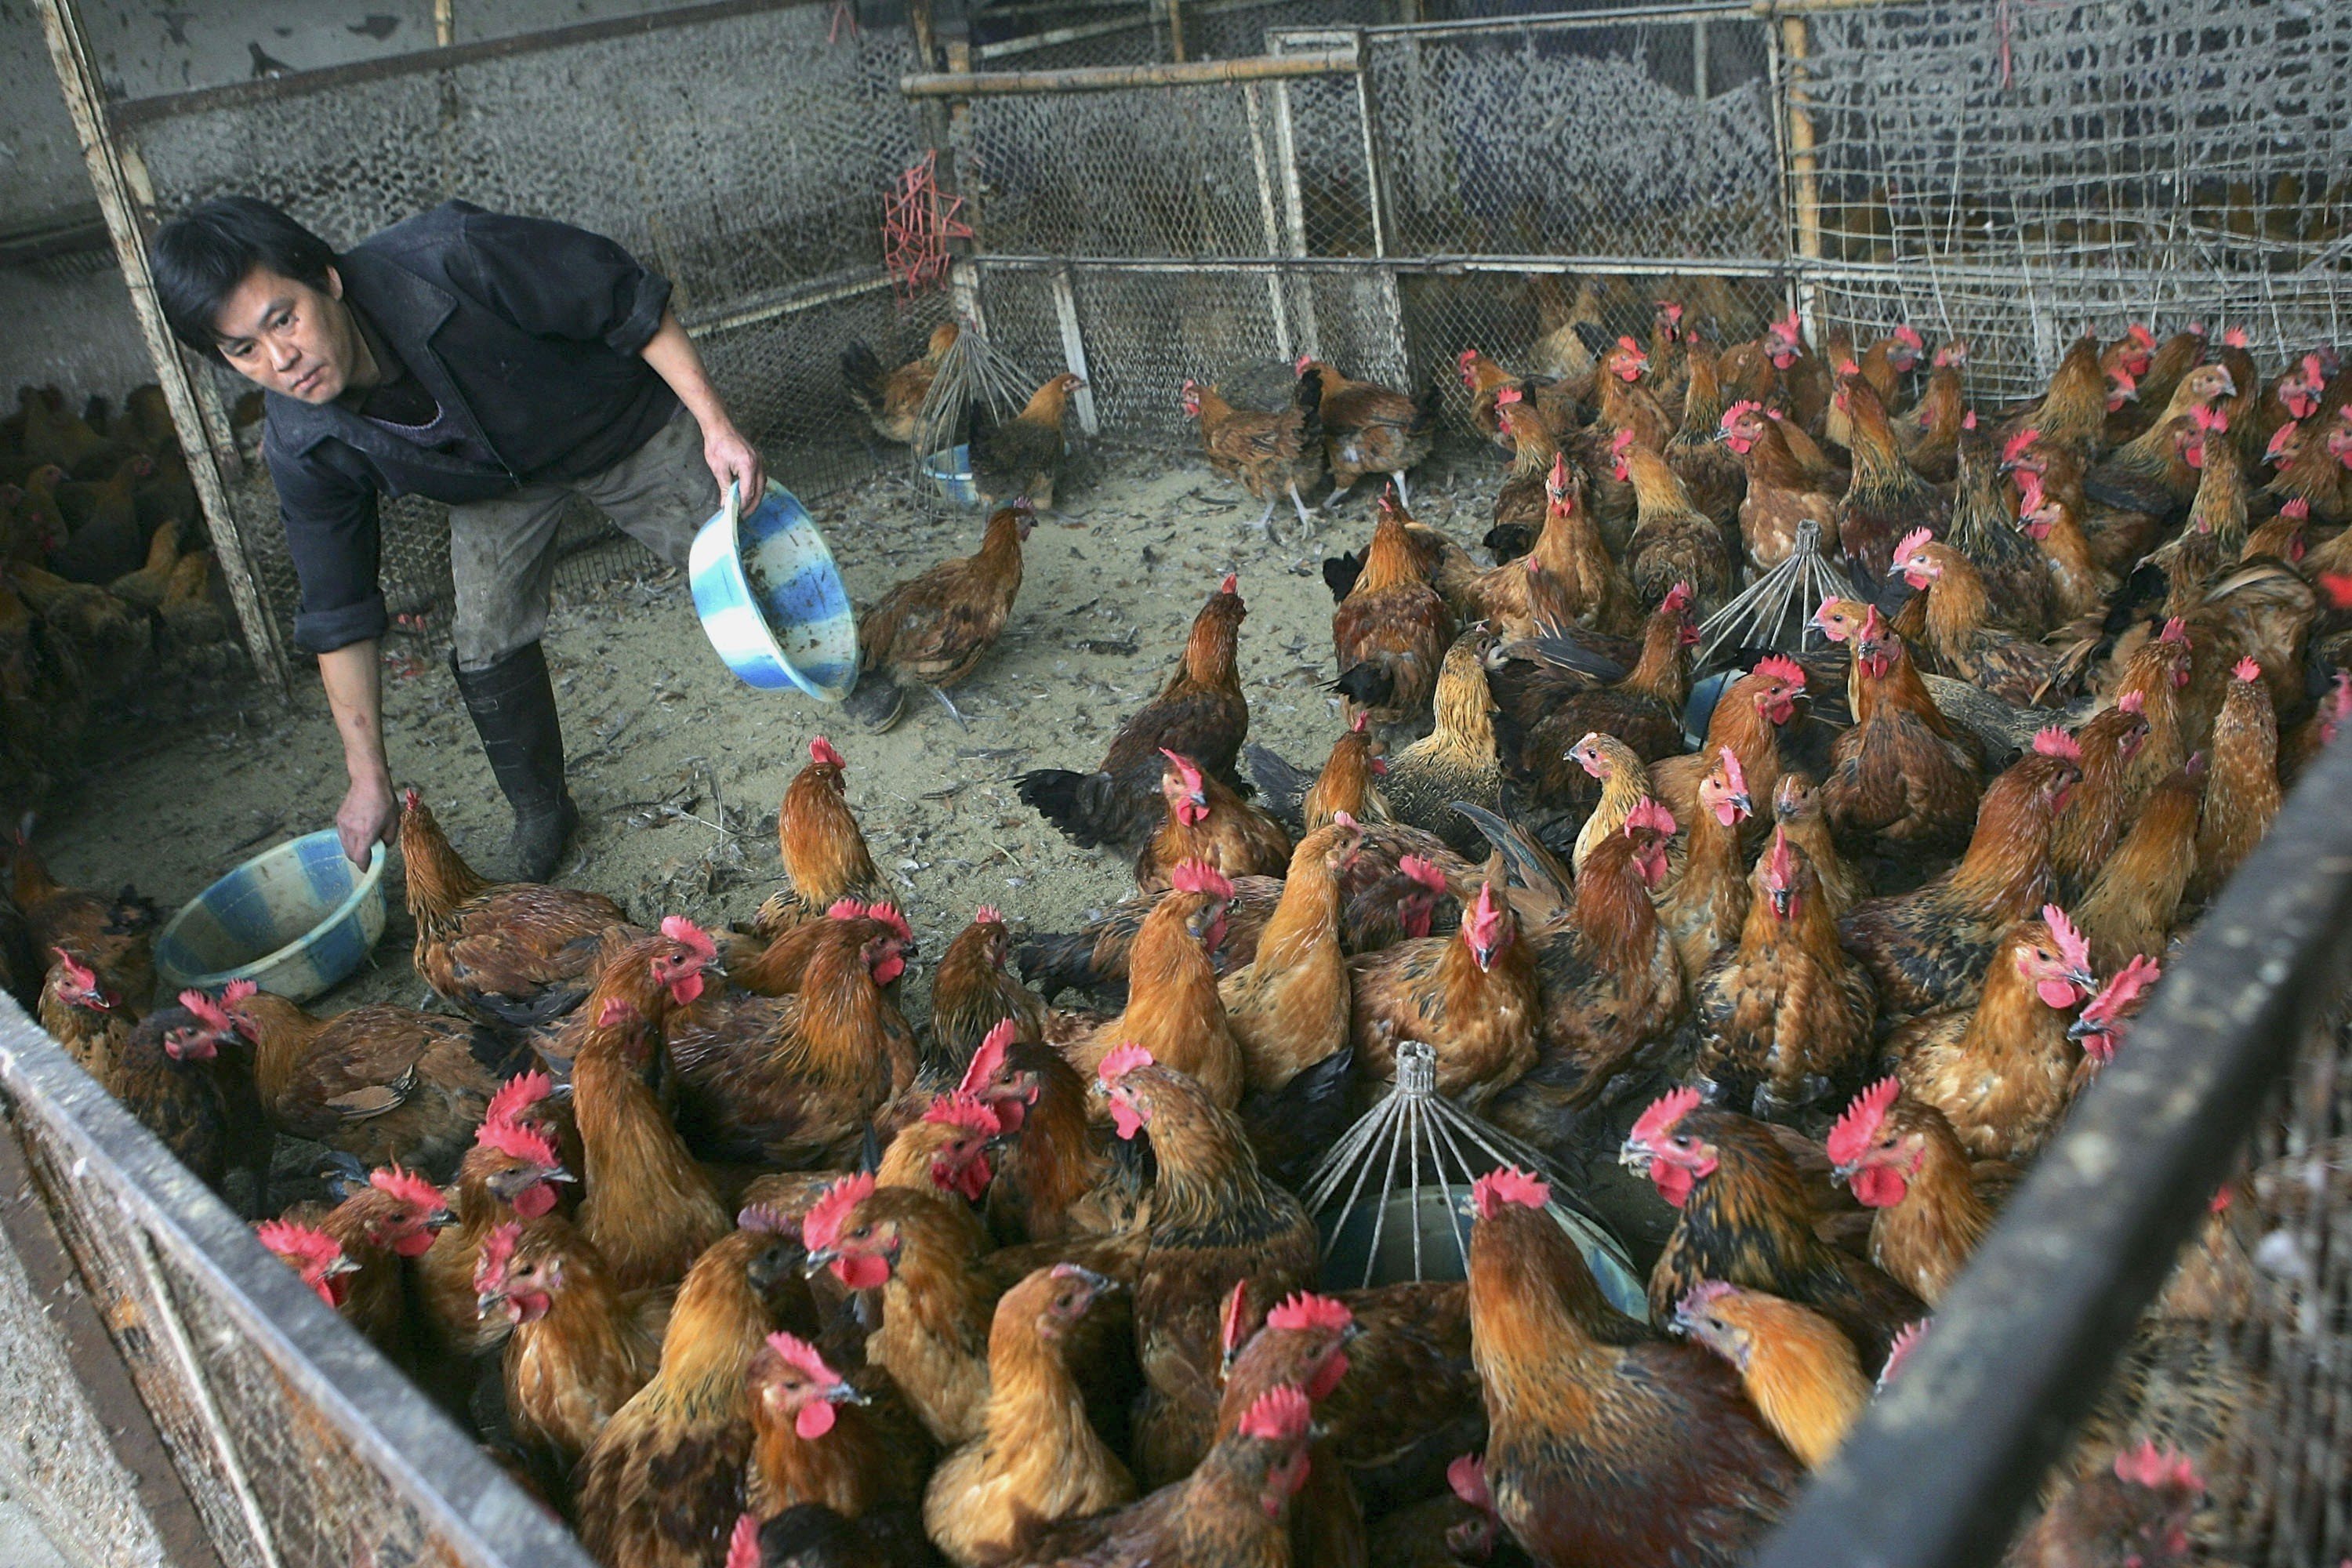 The live poultry trade may play a “significant role” in bird flu transmission across China, researchers say in a new report. Photo: Getty Images